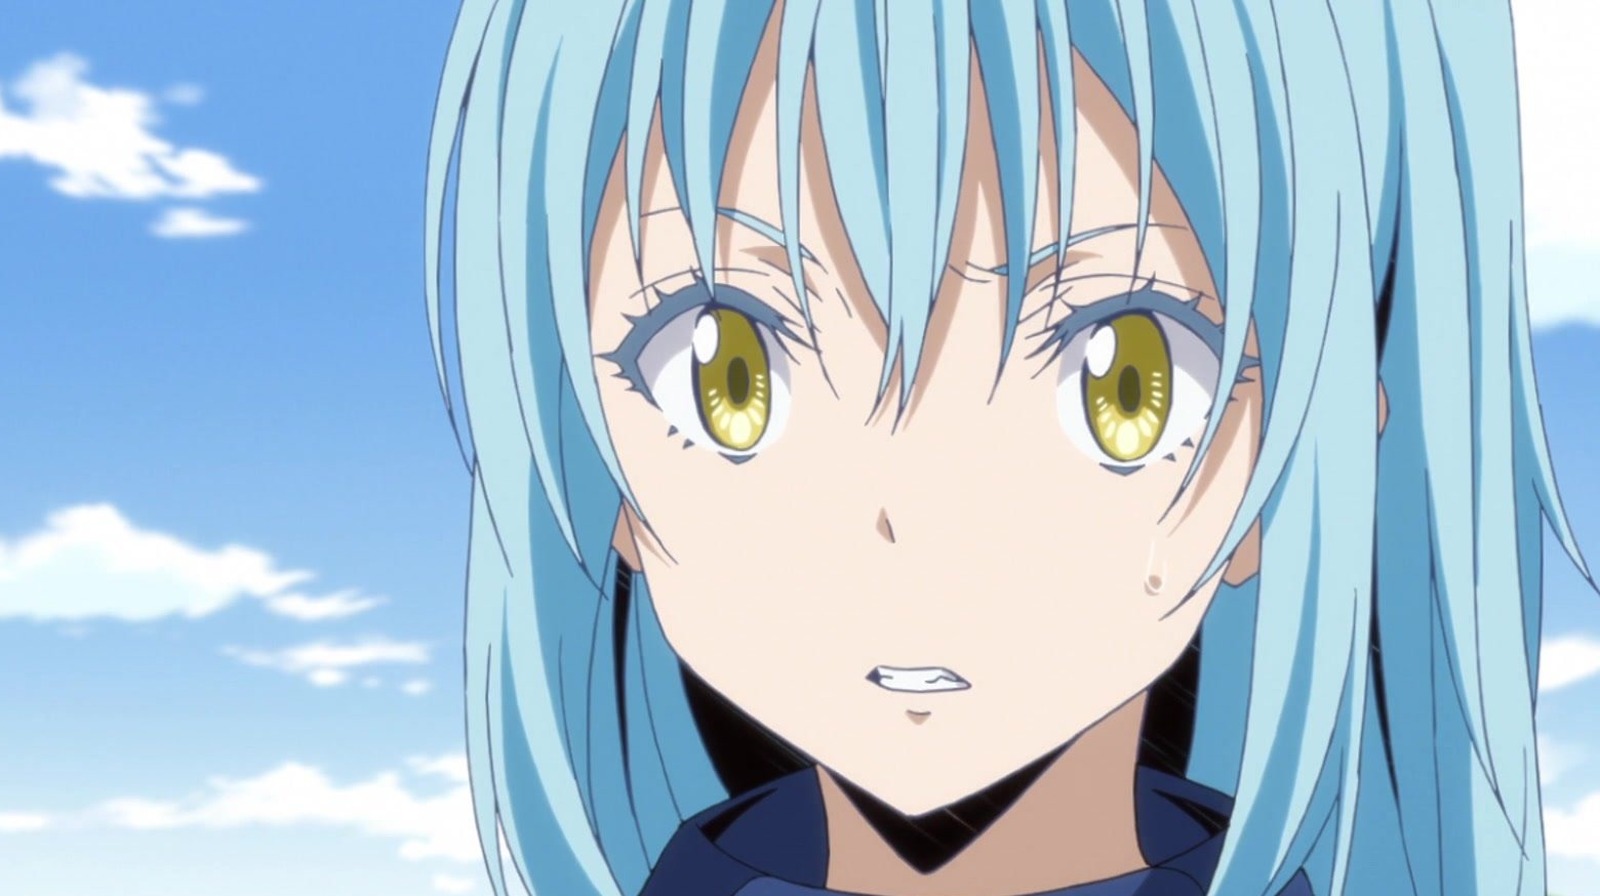 That Time I Got Reincarnated as a Slime S2 Back in Fall! | Anime News |  Tokyo Otaku Mode (TOM) Shop: Figures & Merch From Japan